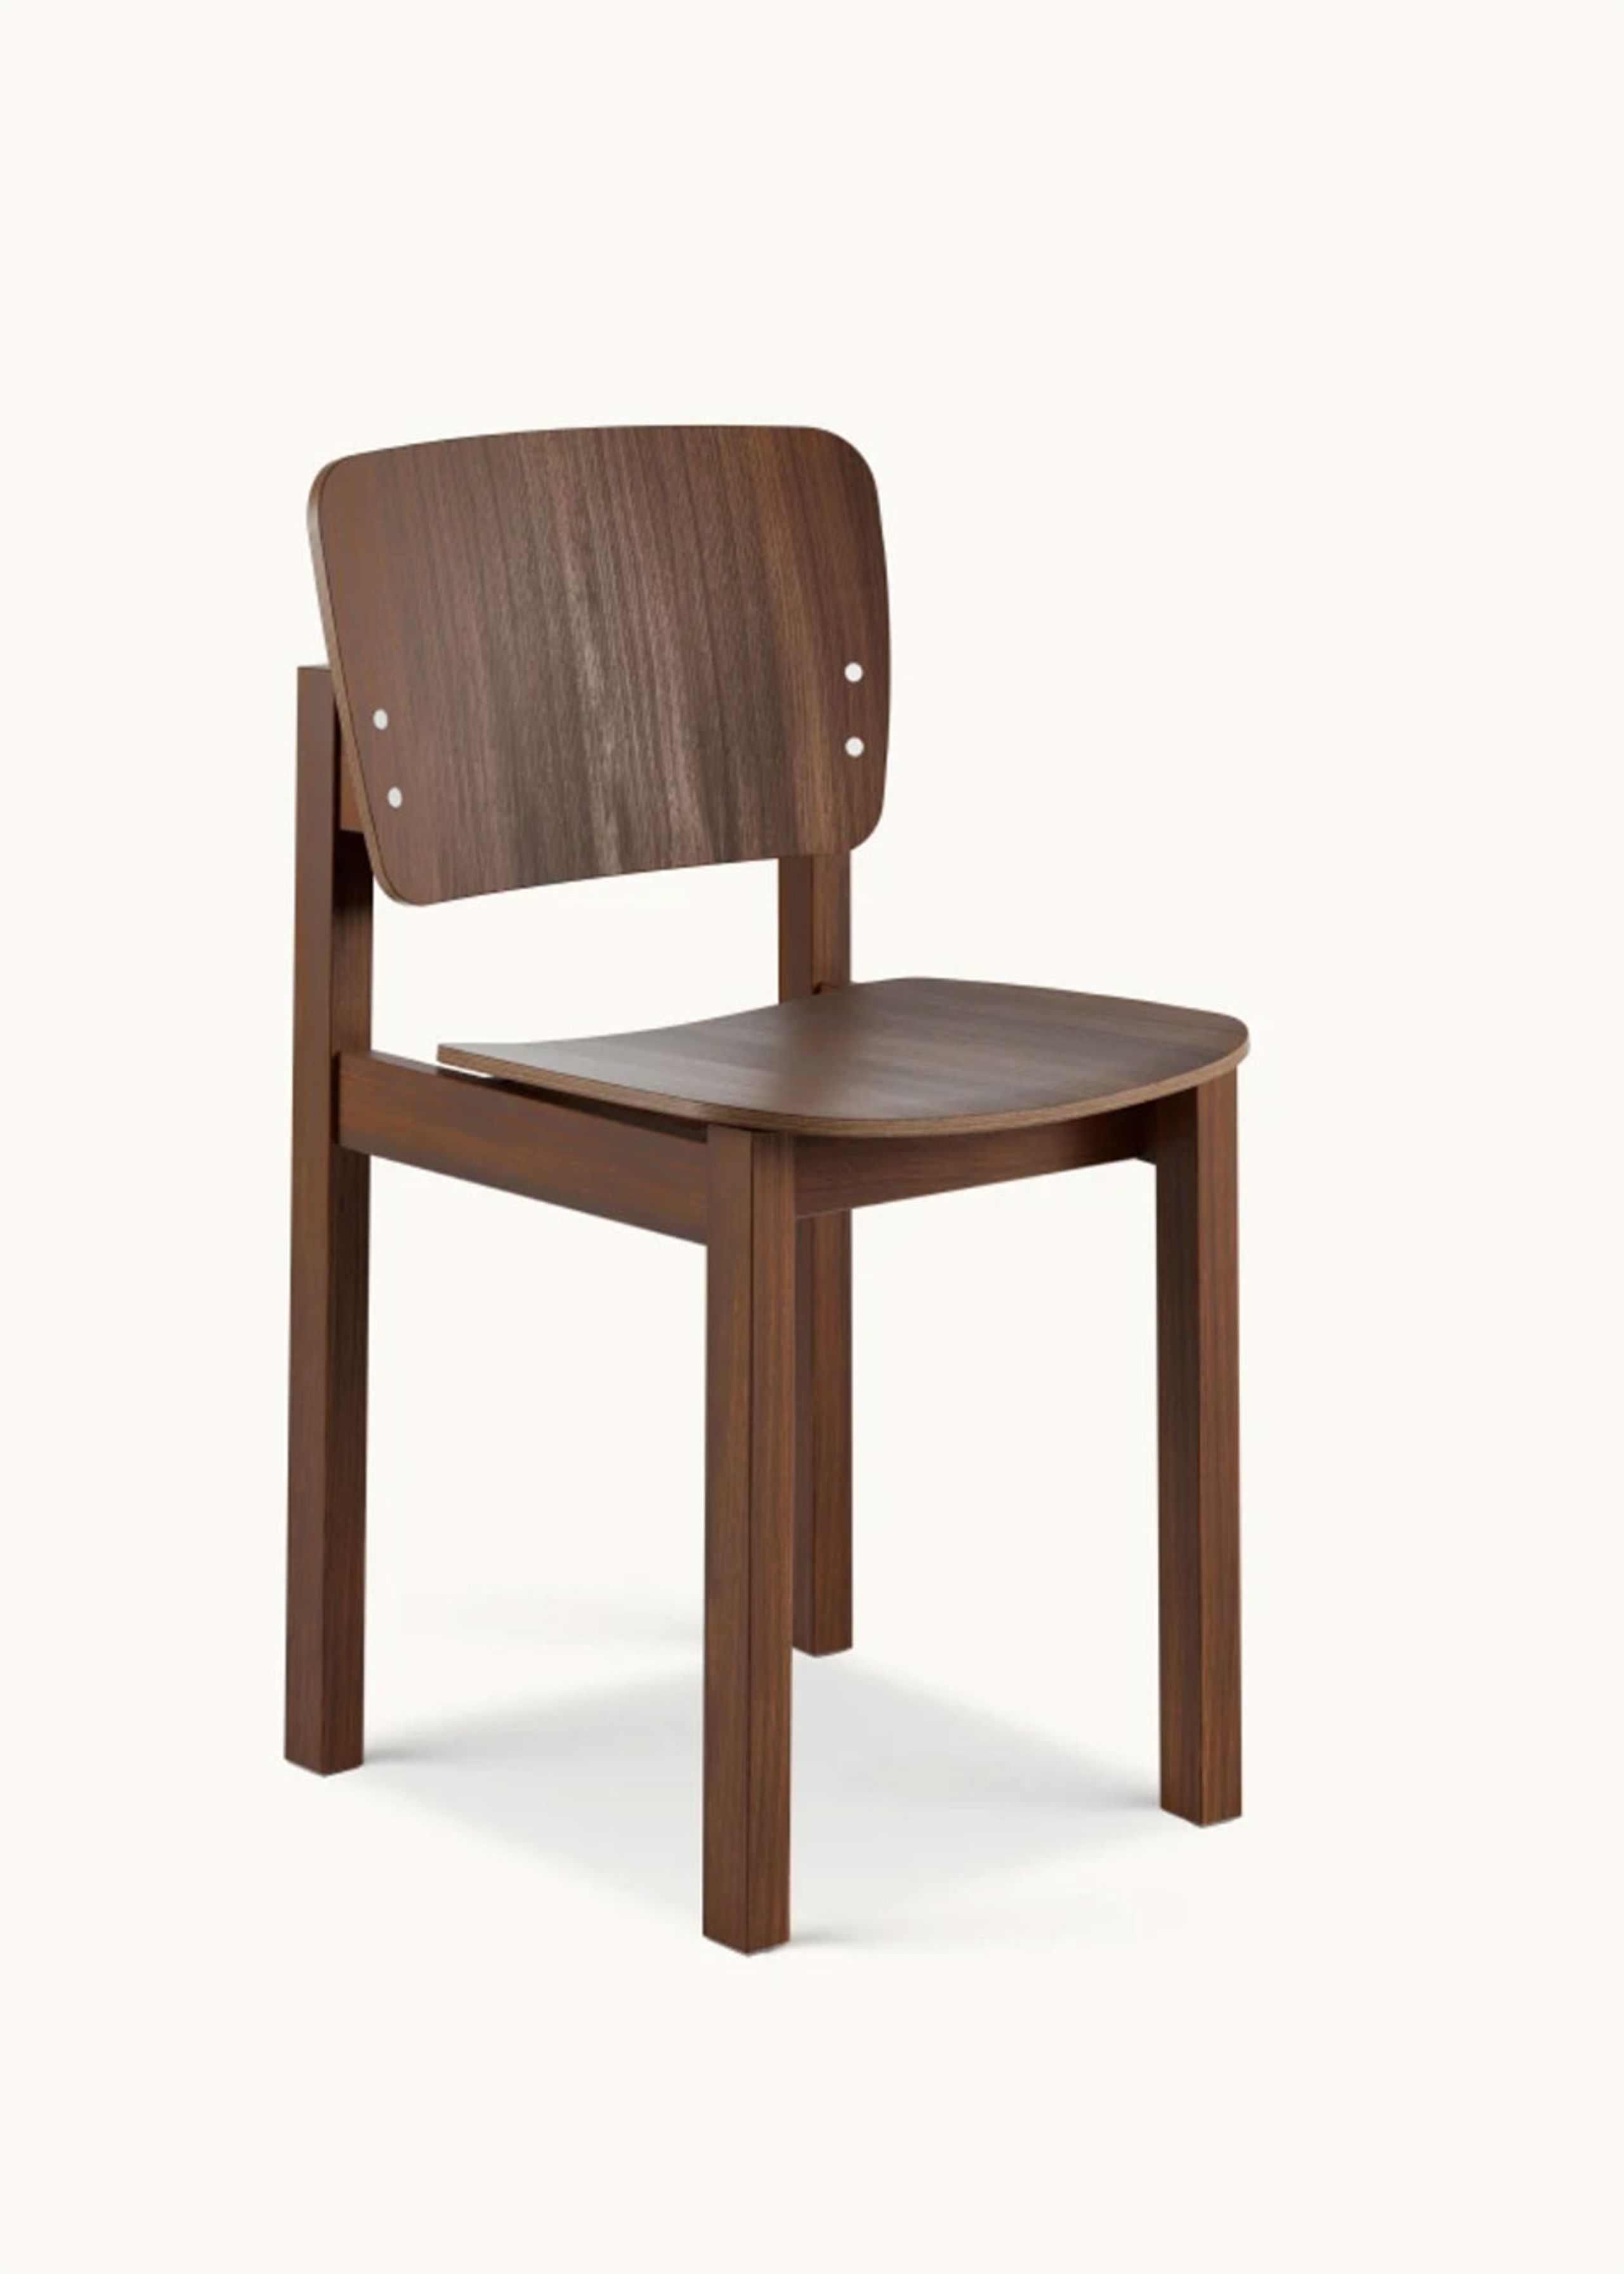 Fogia - Chaise - Mono Chair / Wood - Seat: Smoked Stained Oak